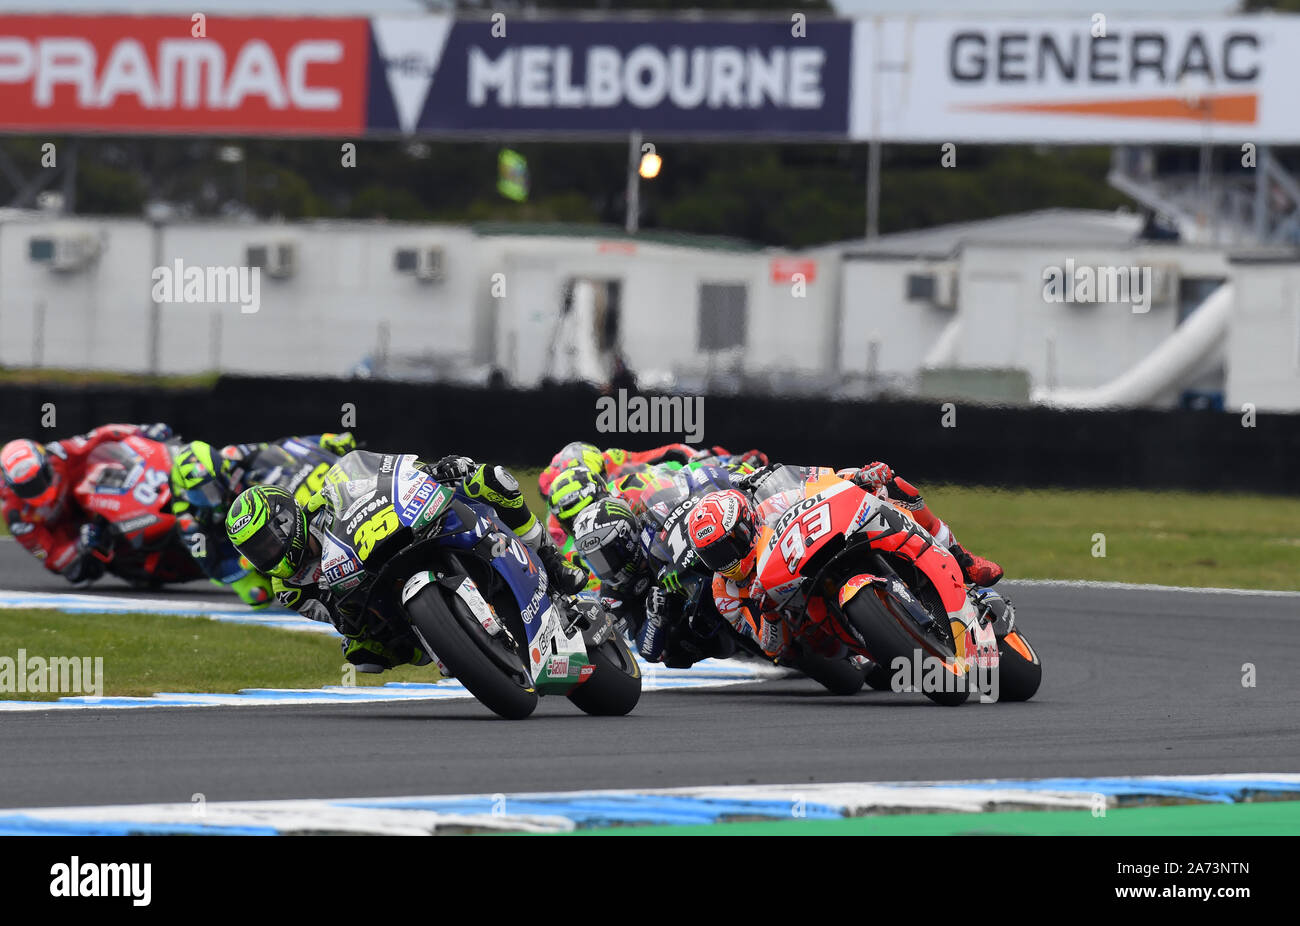 Cal Crutchlow, Marc Marquez and Vinales lead the way through turn 4 in the early stages of the Australian MotoGP Stock Photo